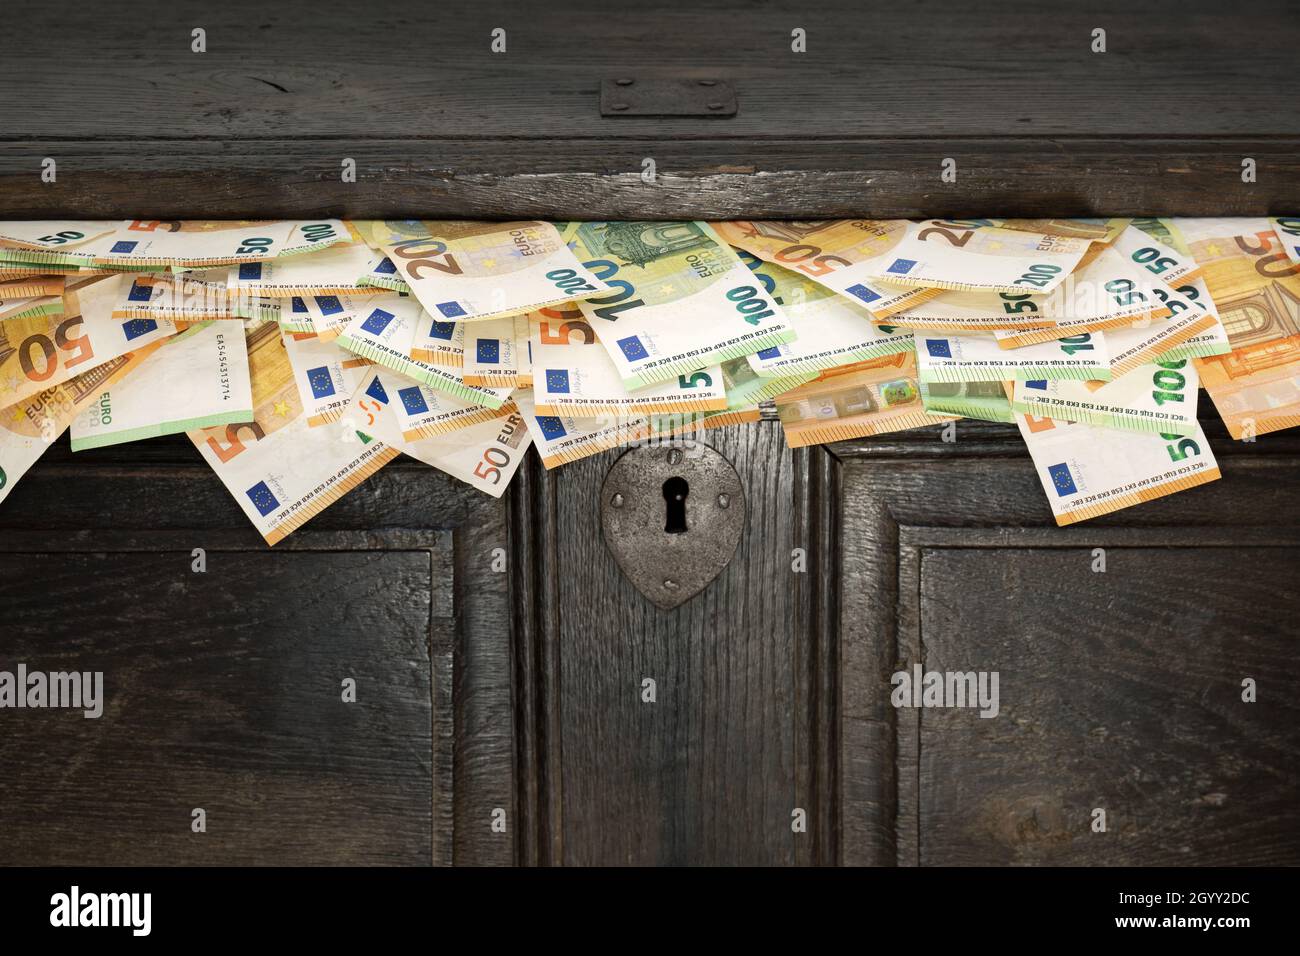 Antique wooden chest from which euro bills spill out. Savings, black money, cash, cash flow. Stock Photo